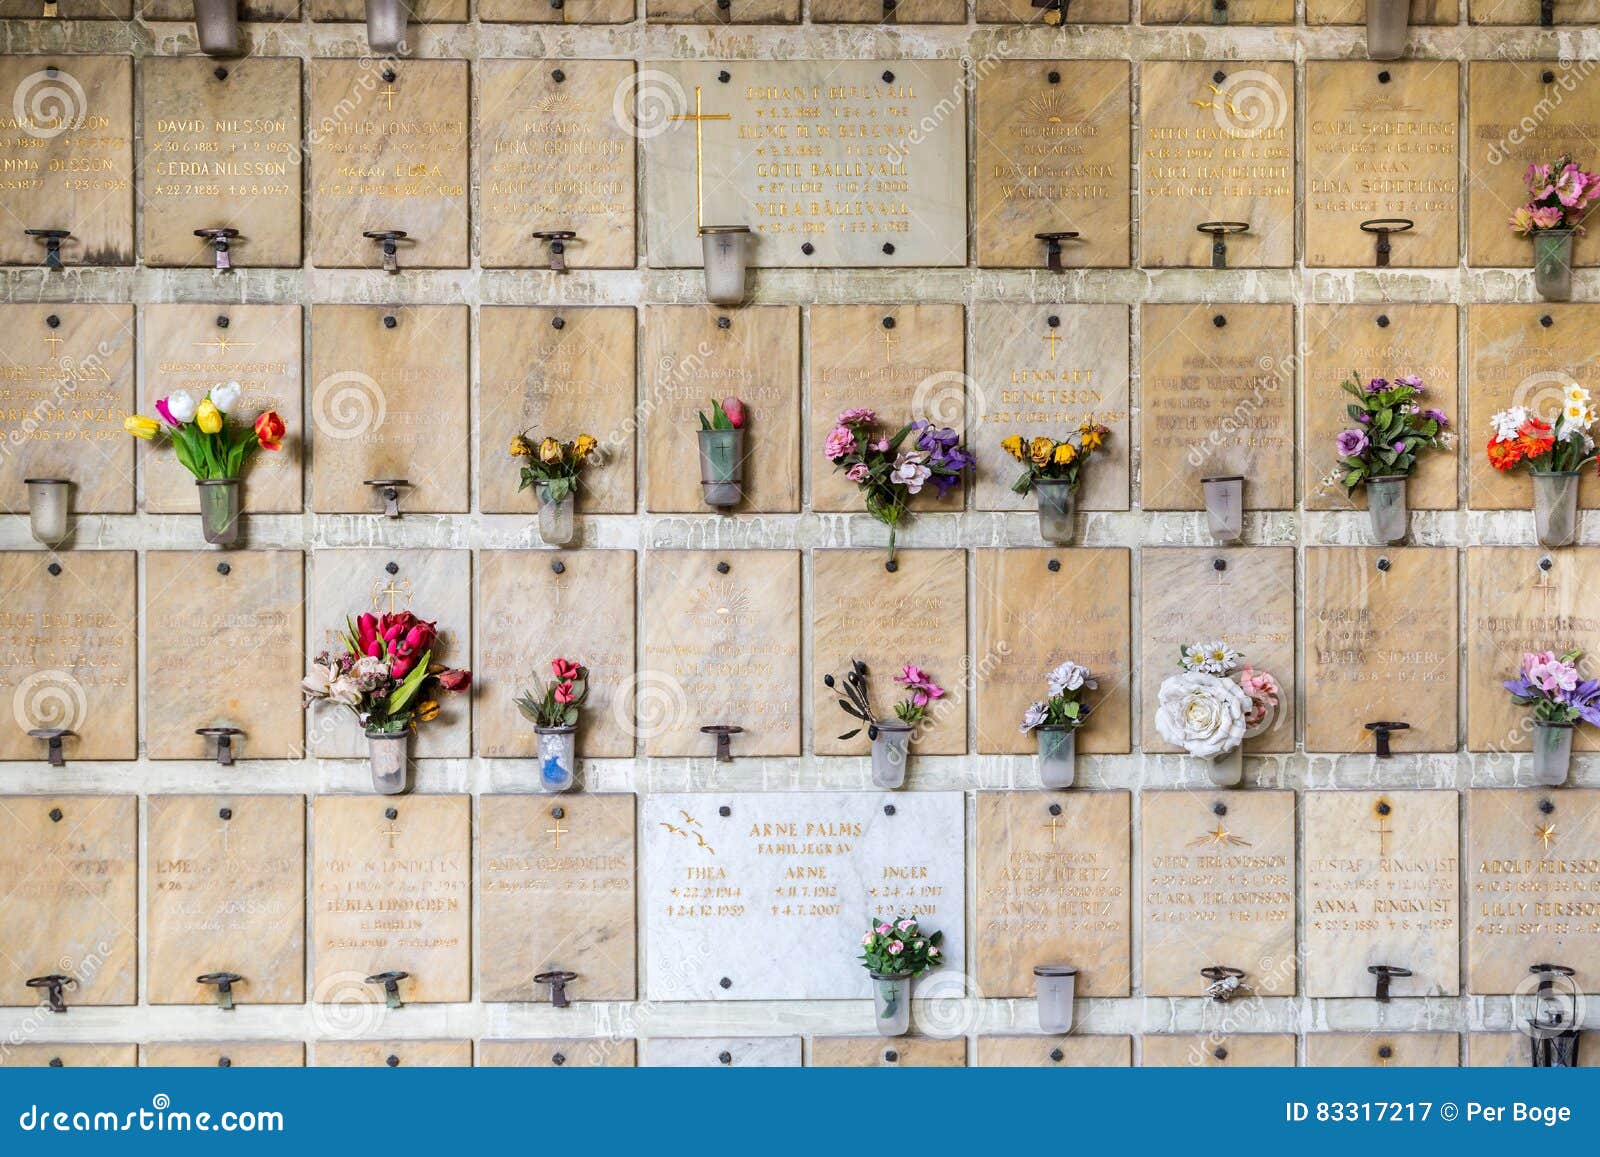 Memorial Wall with Flowers and Names. Editorial Photography - Image of ...